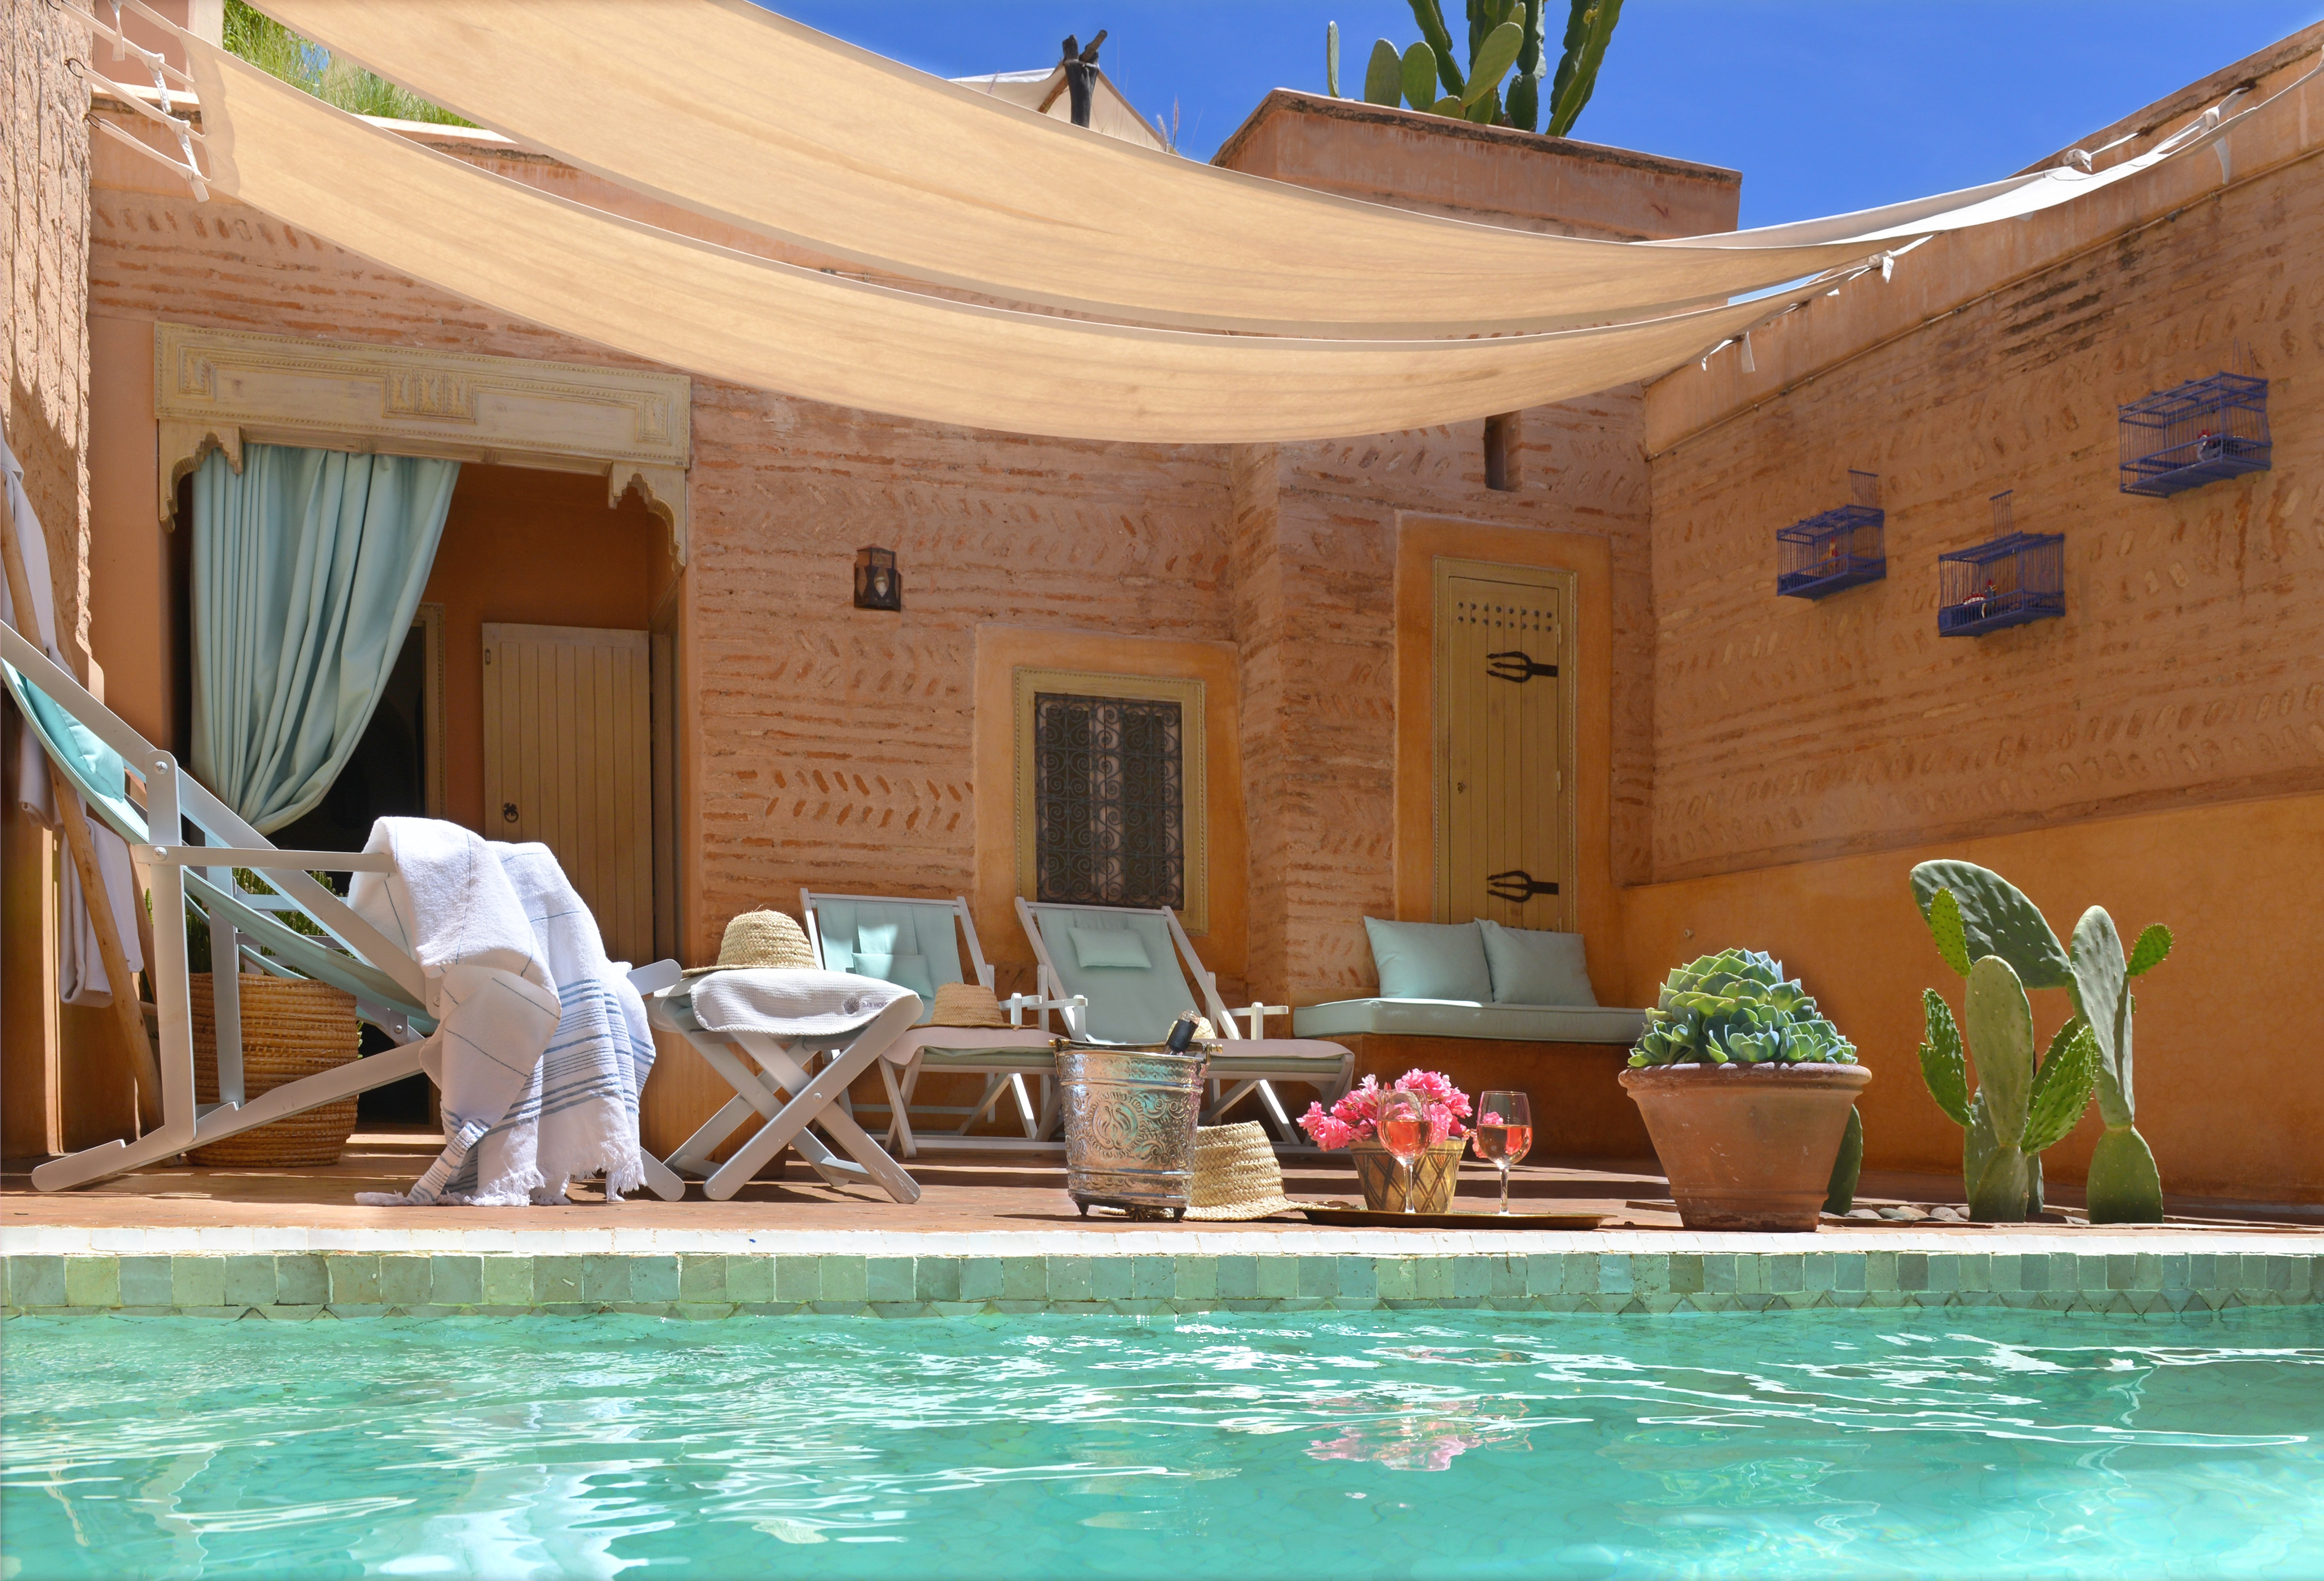 Property Image 1 - Charming Riad and Douiria swimming pool on the terrace - by feelluxuryholidays